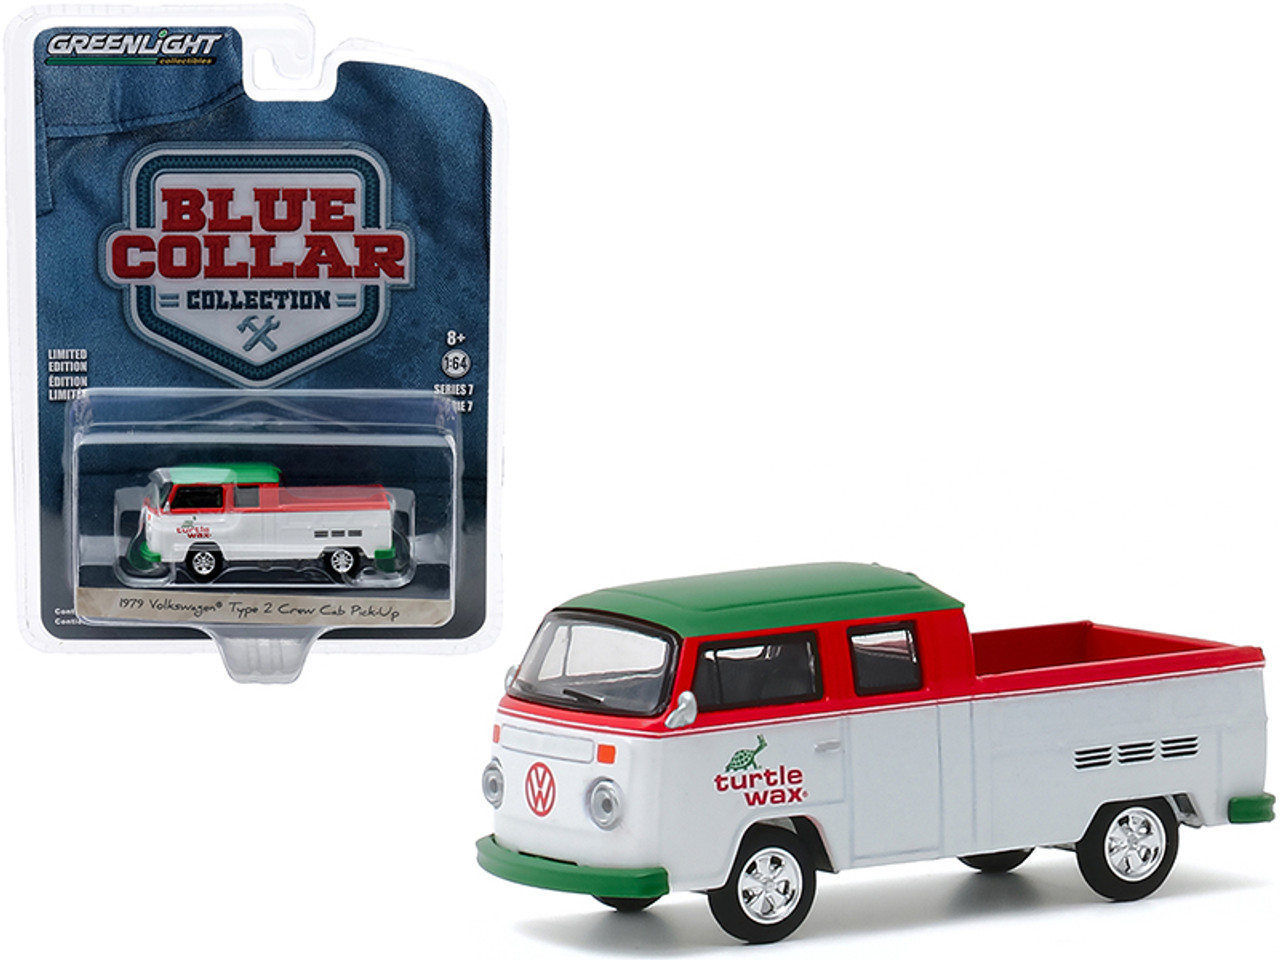 1979 Volkswagen Type 2 Crew Cab Pickup Truck "Turtle Wax" White and Red with Green Top "Blue Collar Collection" Series 7 1/64 Diecast Model Car by Greenlight